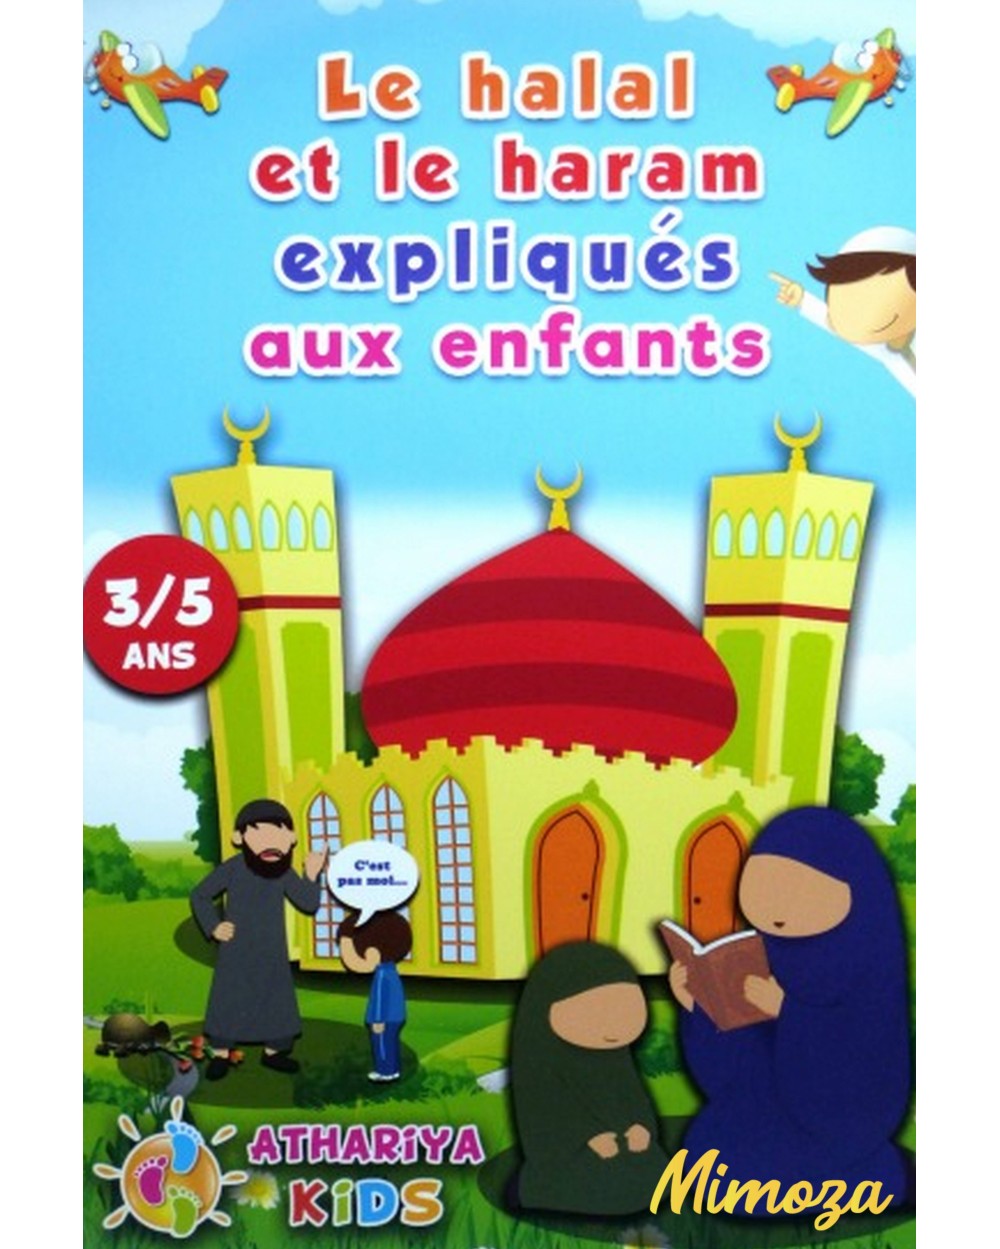 Halal and haram explained to children - 3/5 years old